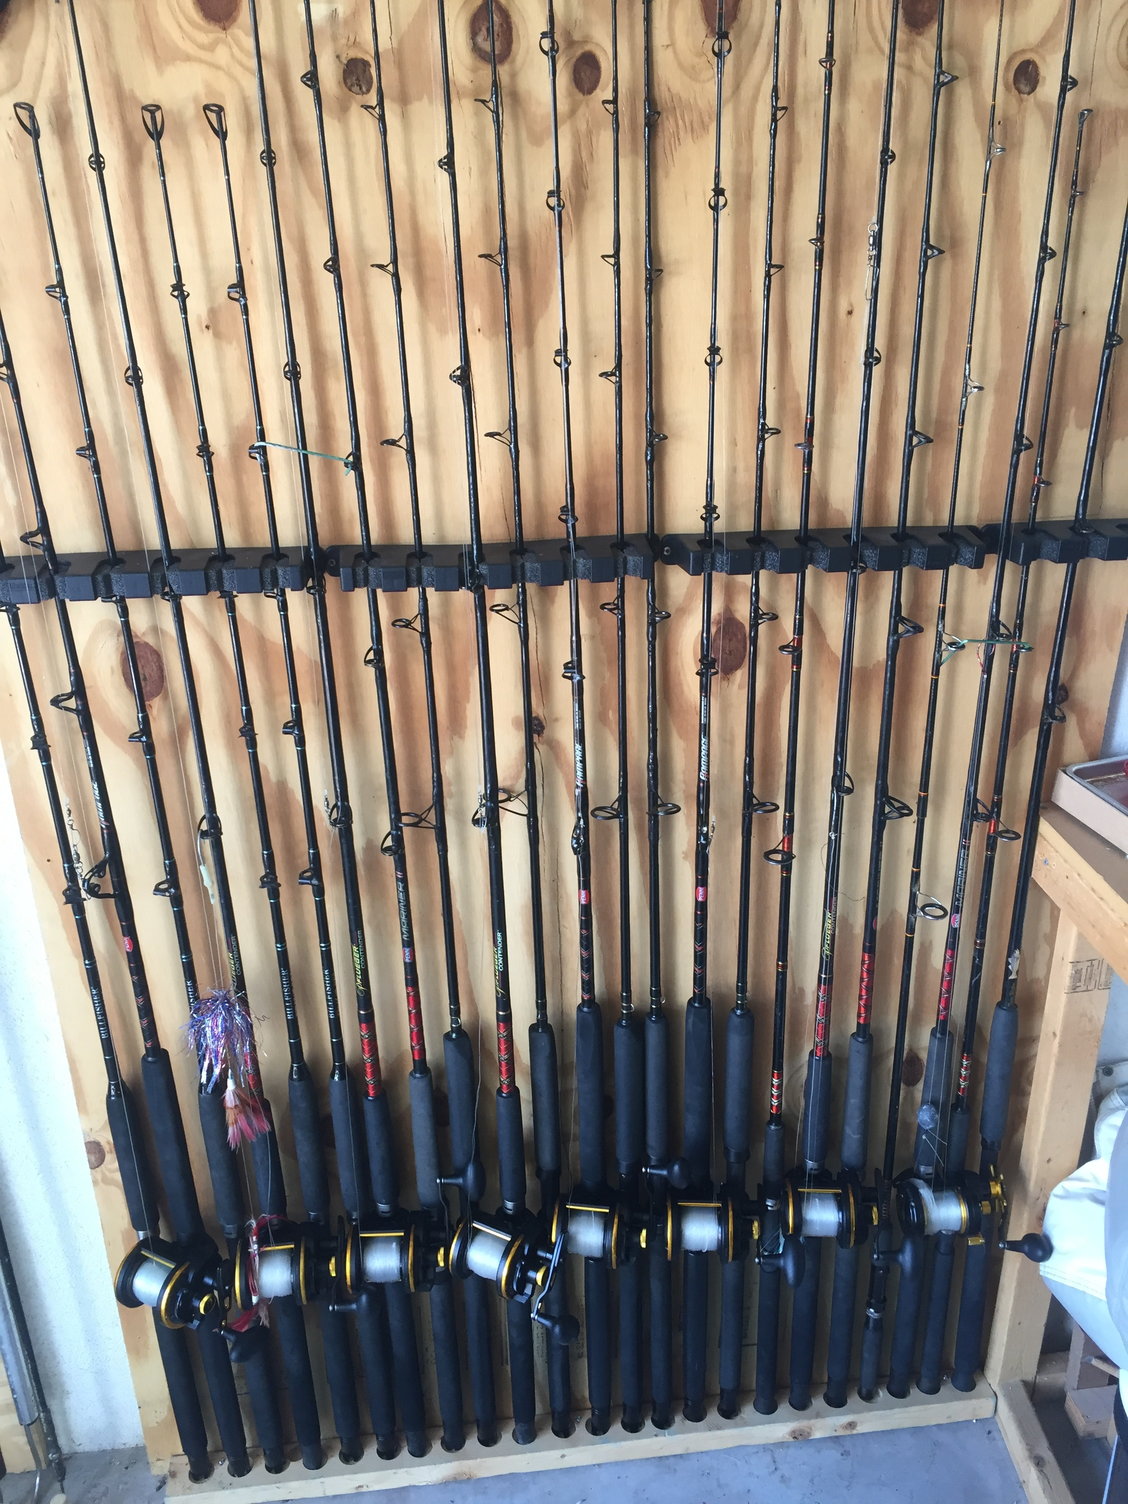 Rod/Reel storage during long distance road trips - The Hull Truth - Boating  and Fishing Forum